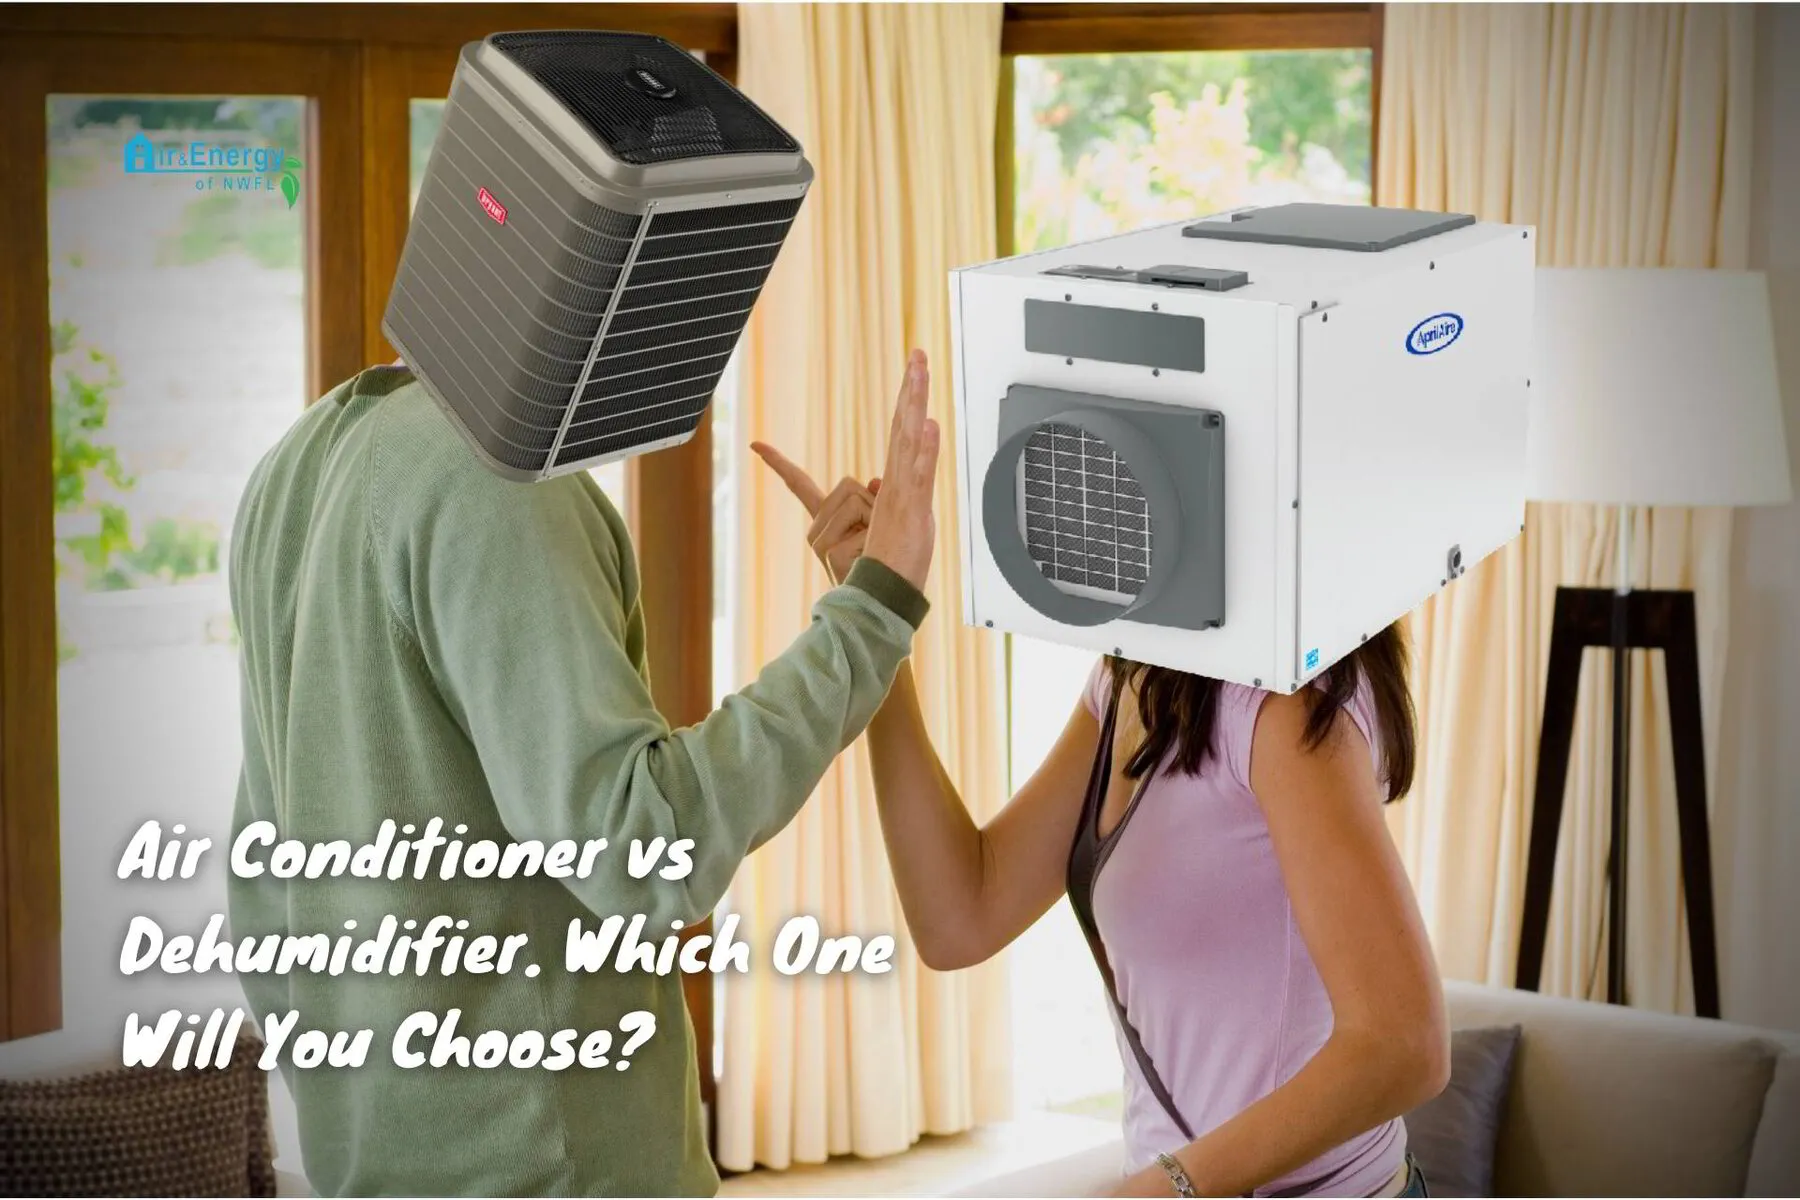 Air Conditioner vs Dehumidifier. Which One Will You Choose? | Air &amp; Energy of NWFL